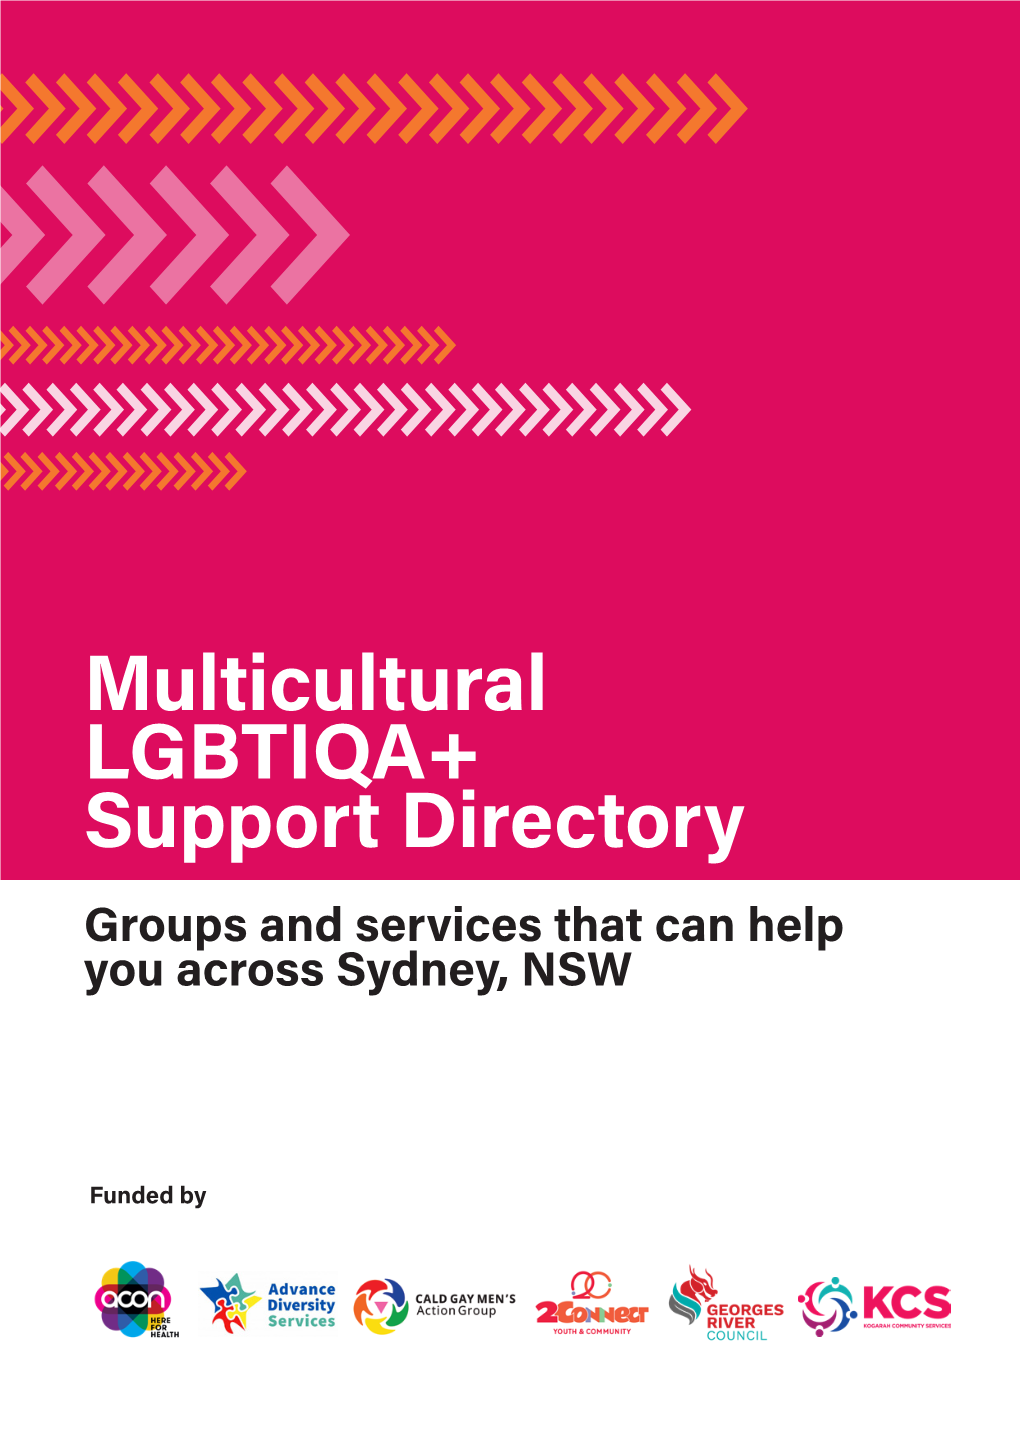 Multicultural LGBTIQA+ Support Directory Groups and Services That Can Help You Across Sydney, NSW